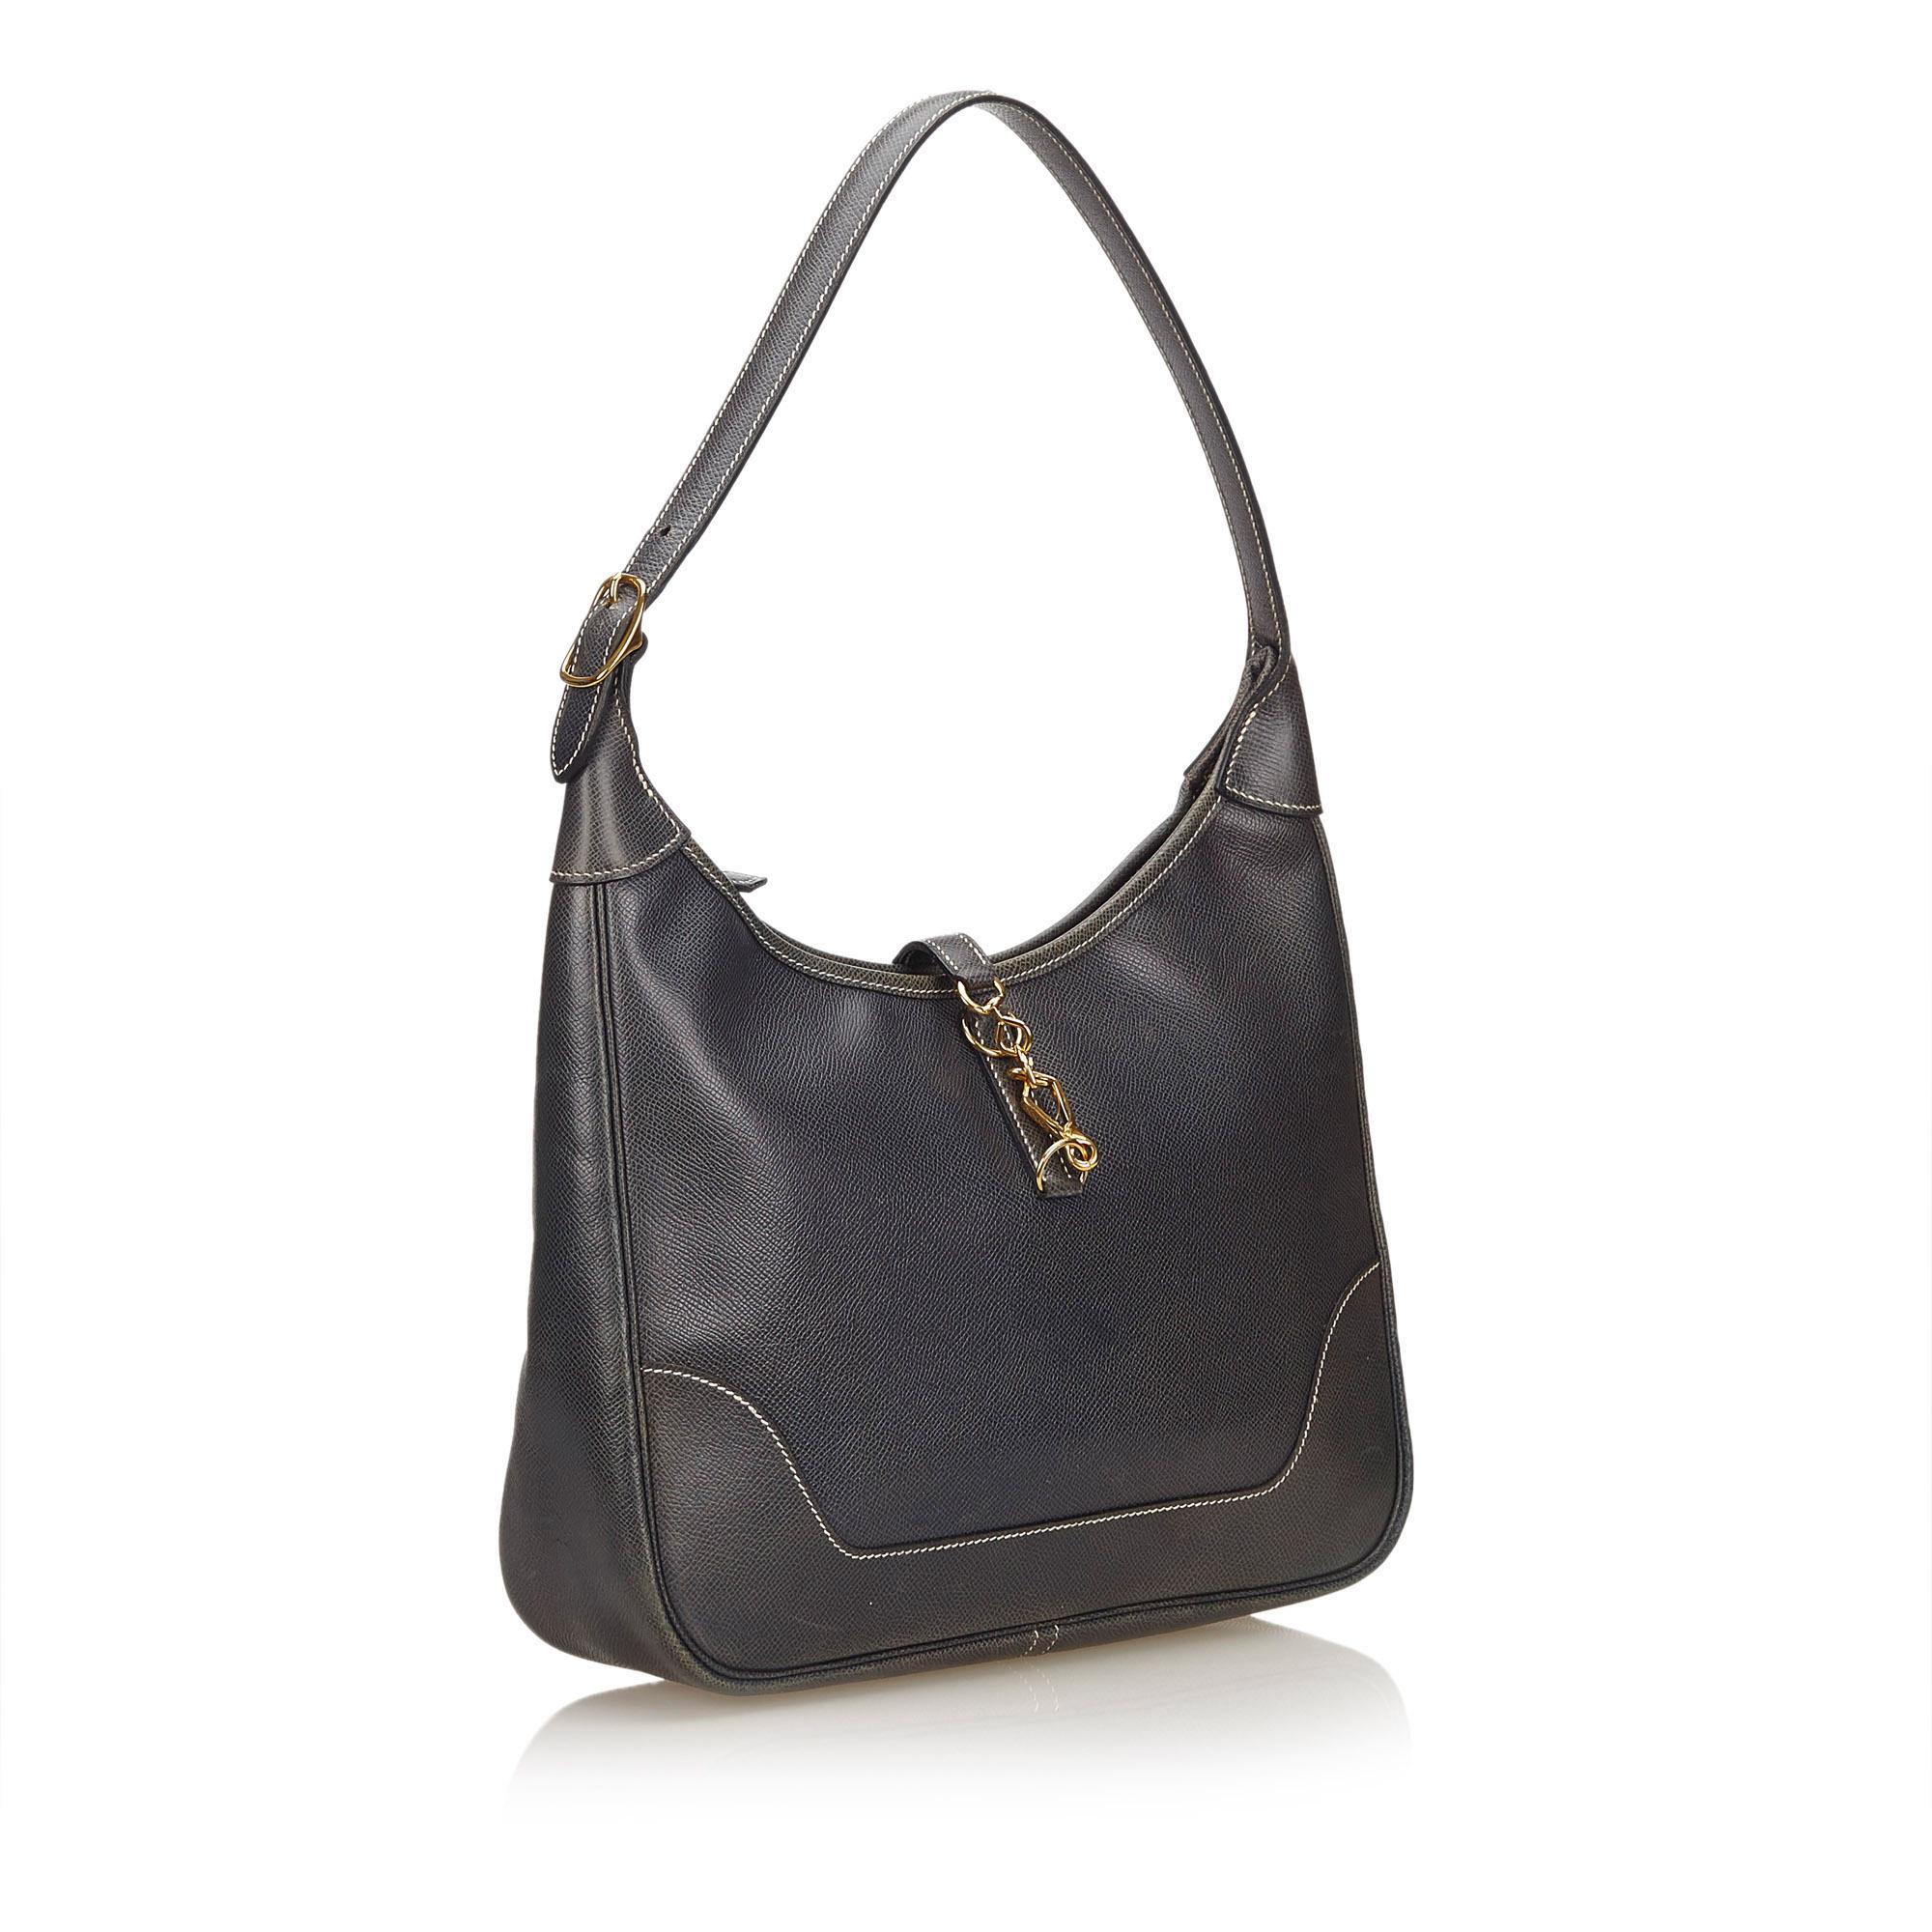 The Trim 31 features a leather body, a flat shoulder strap, a top strap with a lobster claw closure, a top zip closure, and interior zip and slip pockets.

It carries a B condition rating.

Dimensions: 
Length 28 cm
Width 30 cm
Depth 6 cm
Shoulder